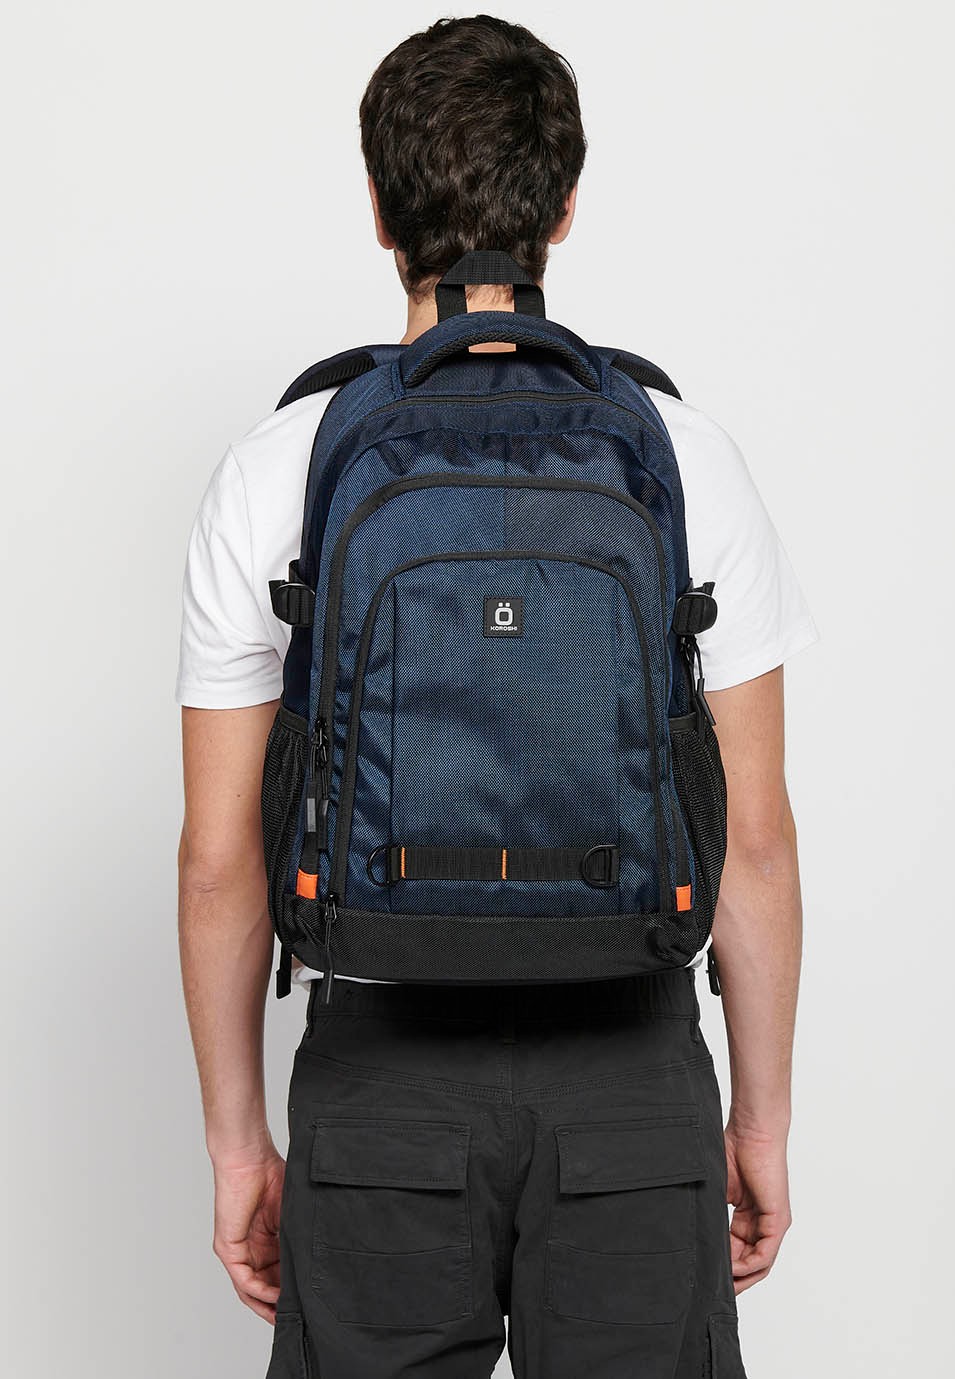 Koröshi backpack with three zippered compartments, one for a laptop, with Navy interior pockets 7